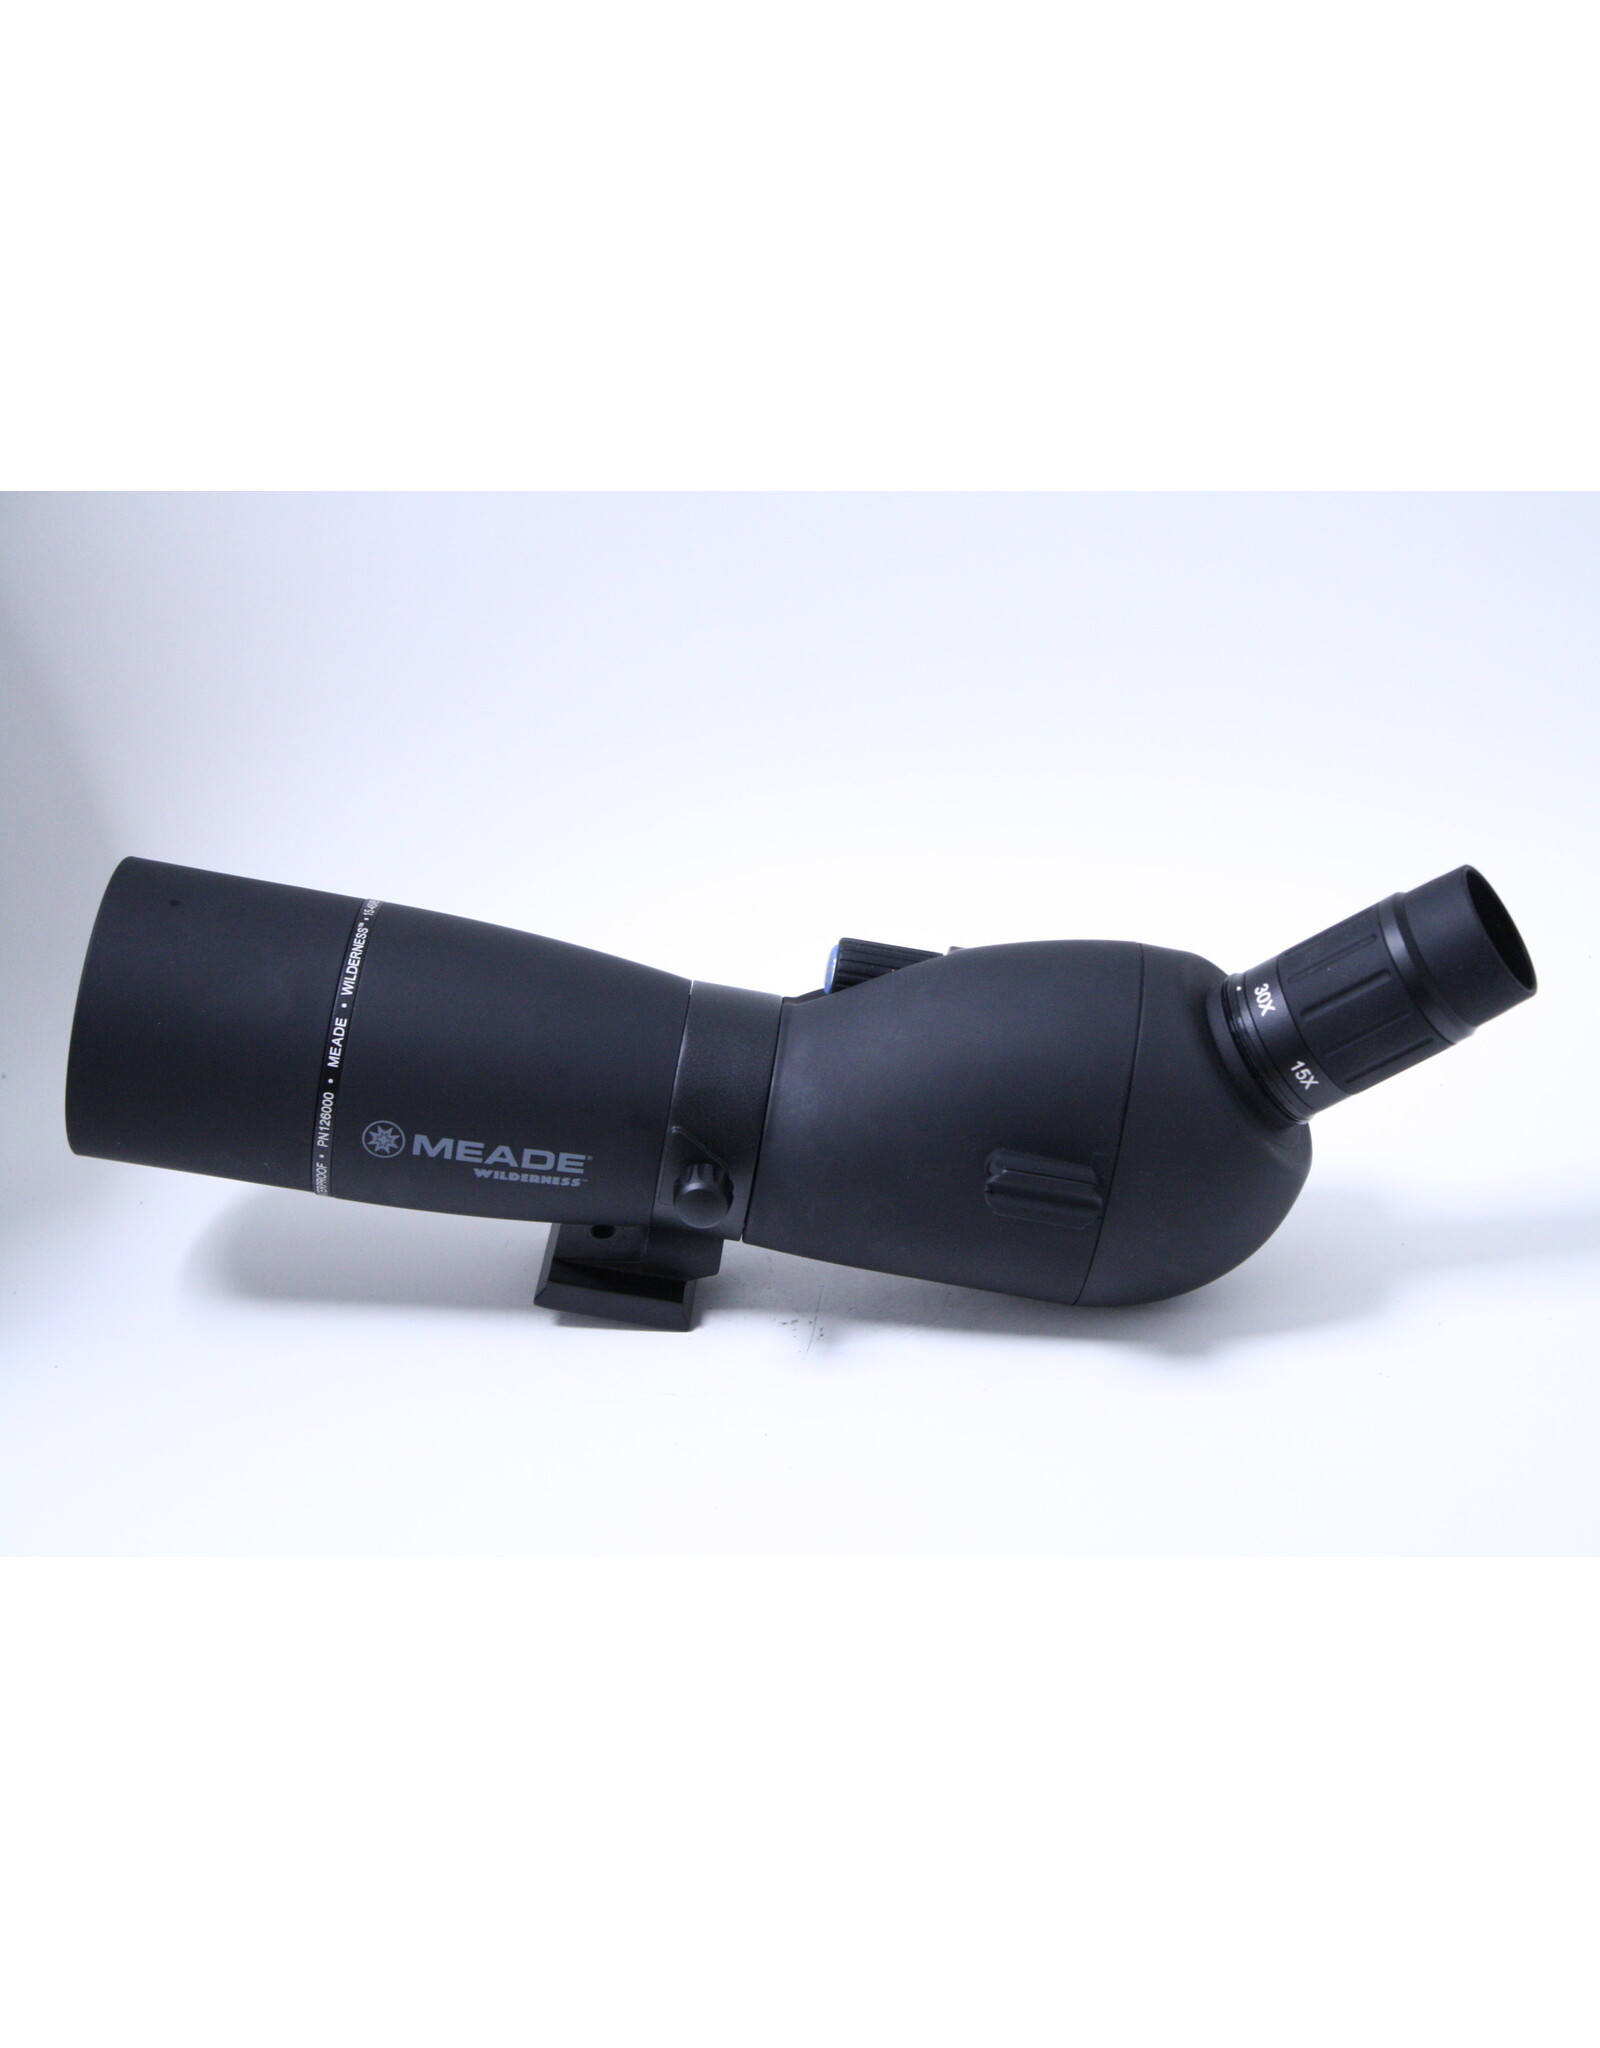 Meade Meade Wilderness Spotting Scope 15-45x65mm  with Case (Pre-owned)